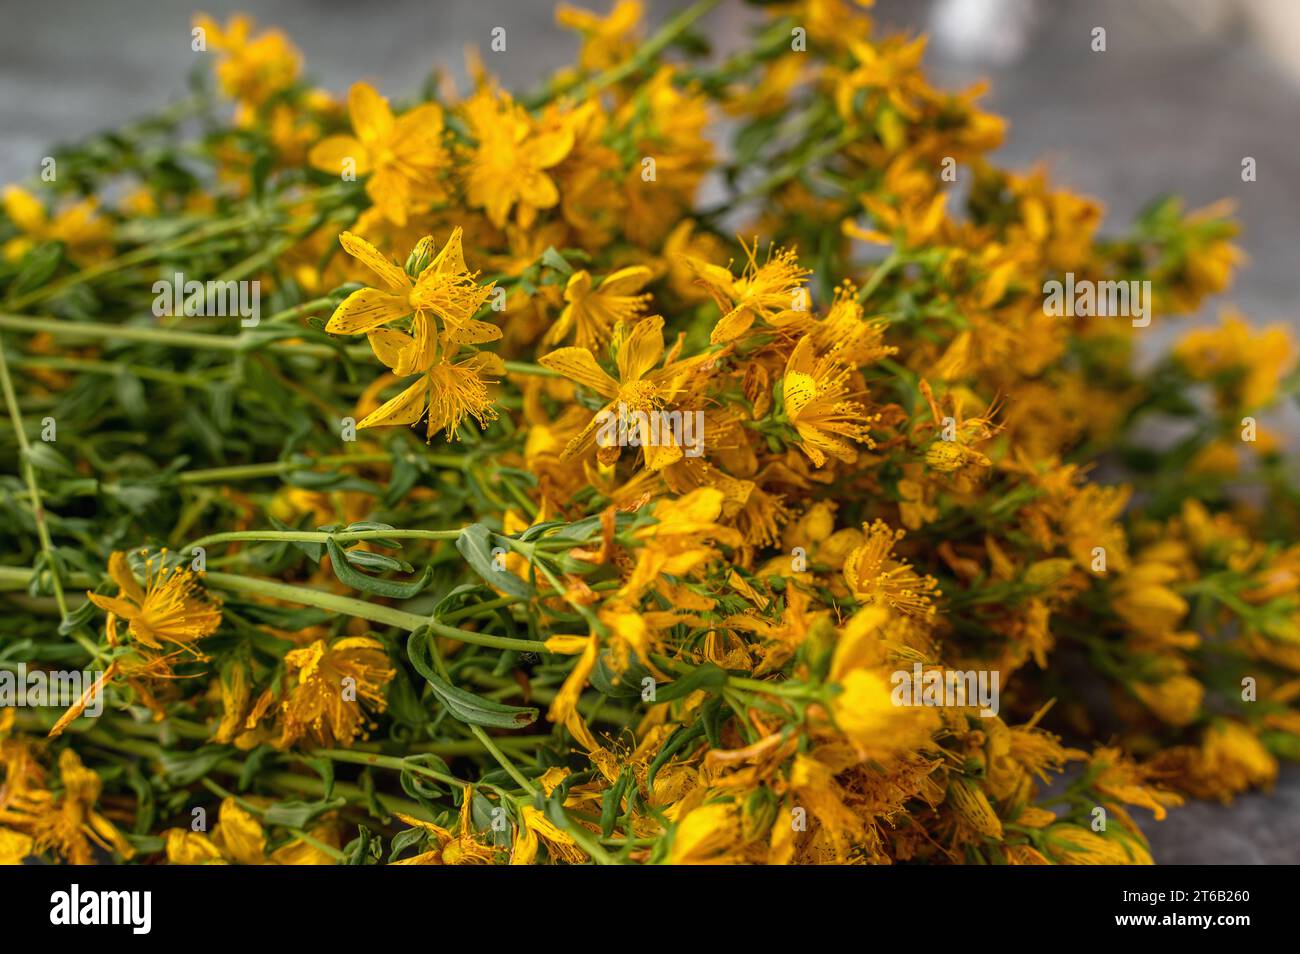 medicinal herb St. John's wort is prepared for drying. twigs and dried flowers of St. John's wort on a gray background. Stock Photo